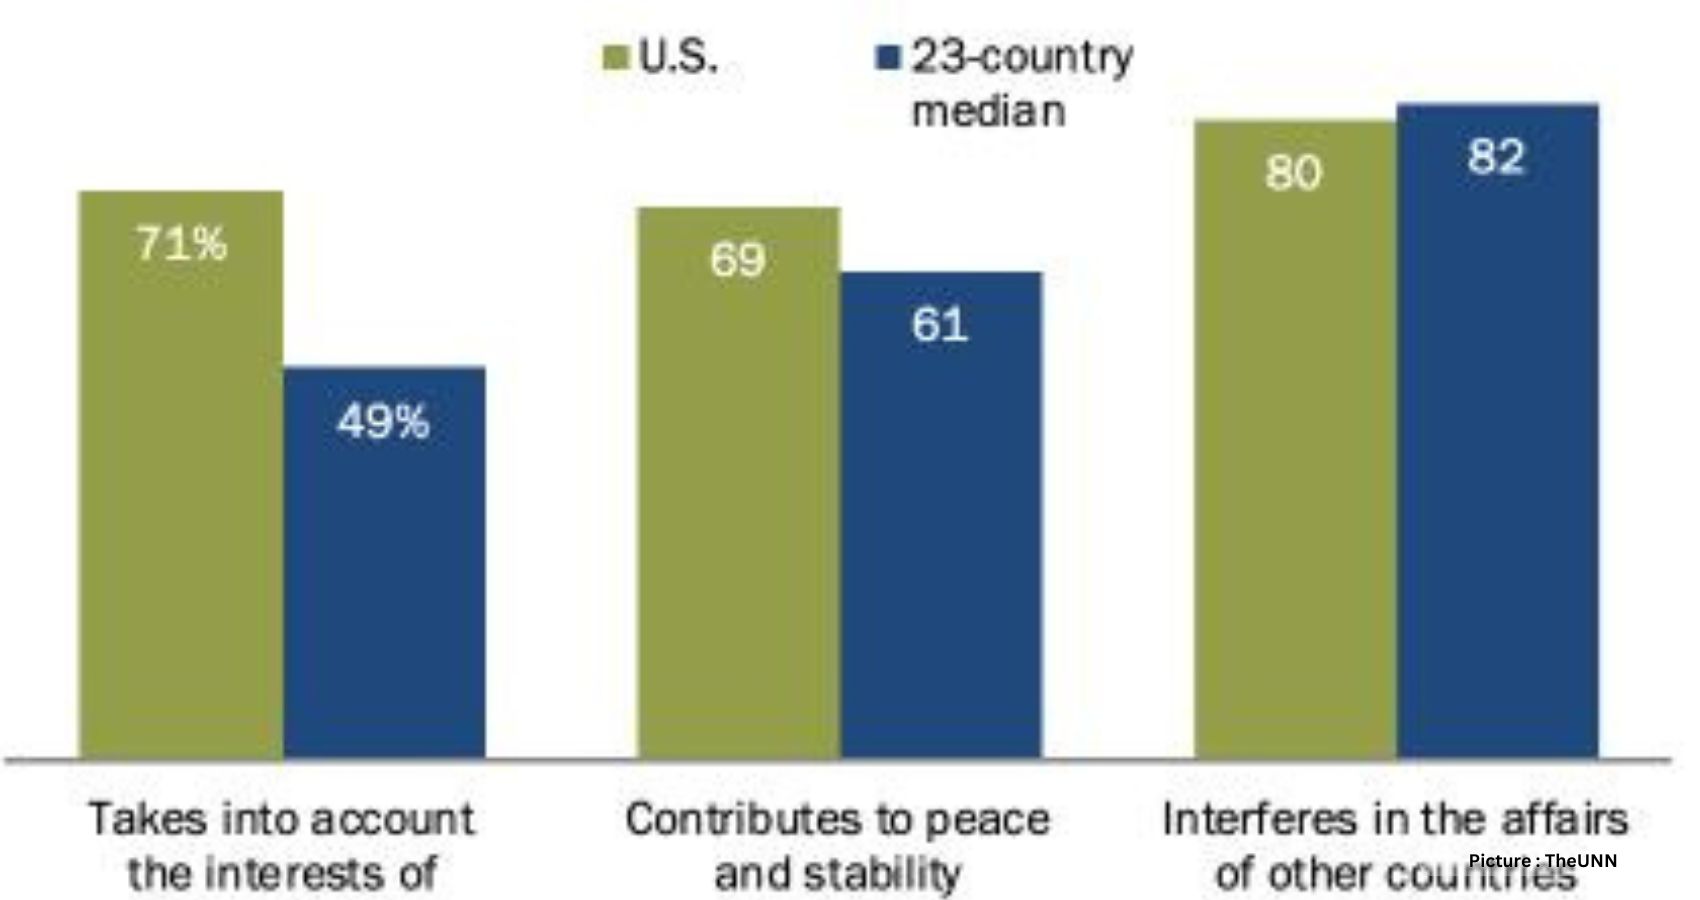 How Do Americans’ Views Of The U.S. Compare With International Views Of The U.S.